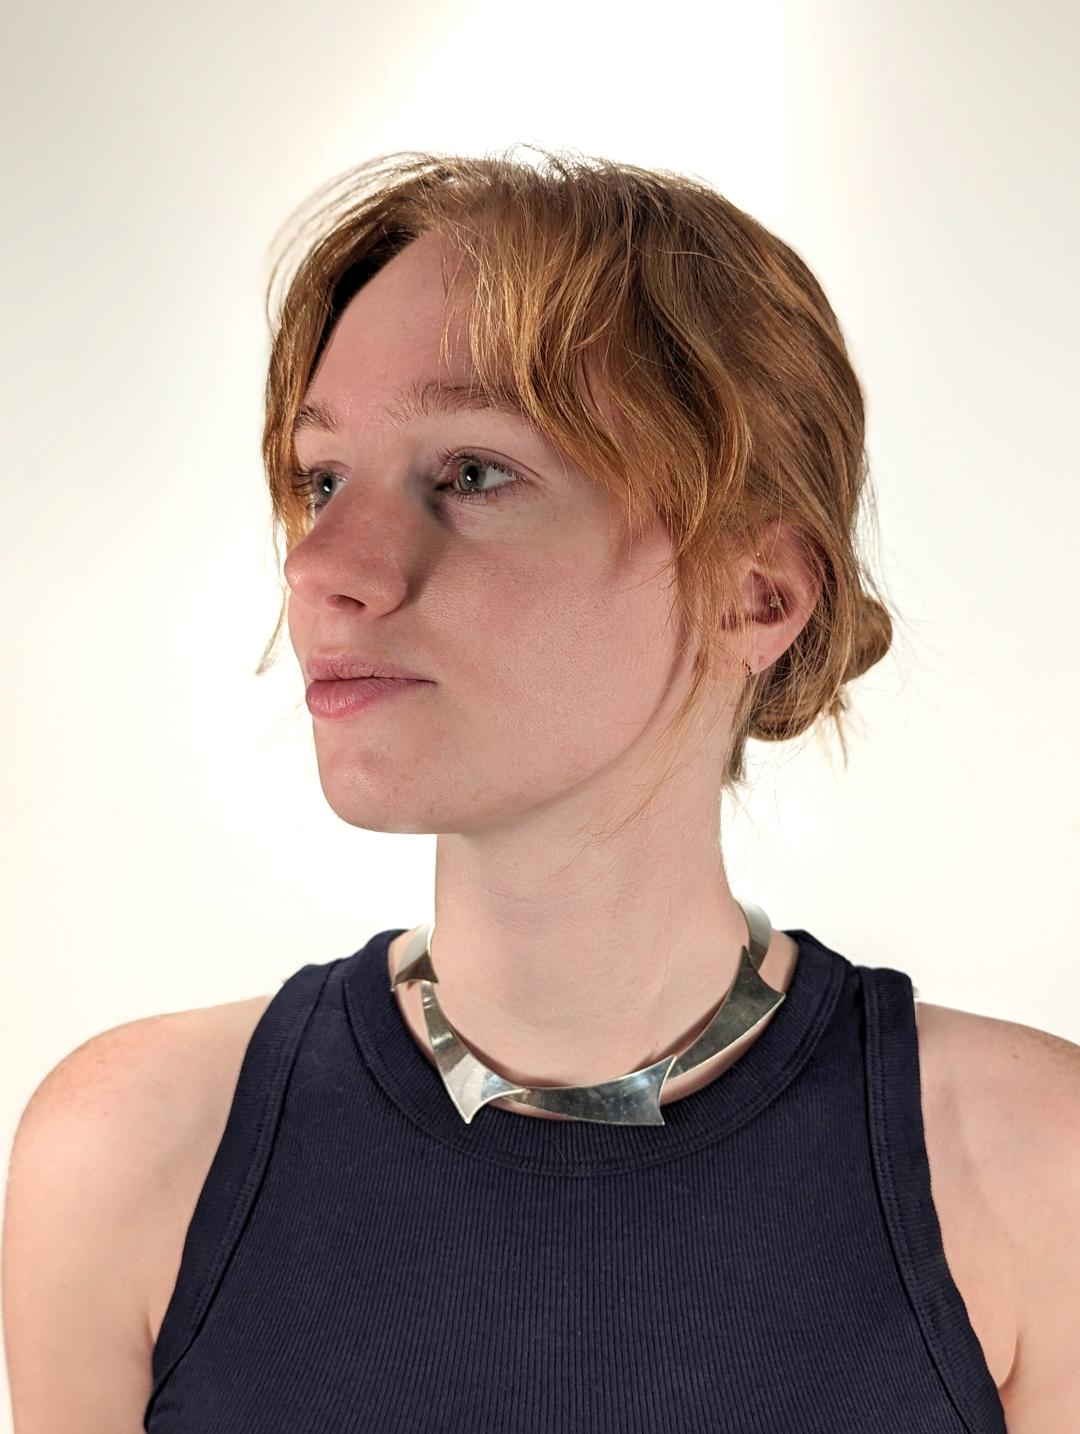 A fine Modernist collier or choker necklace.

In sterling silver.

By Noble Smith (Shirley Smith), an American female silversmith of note active in the 1960's.

Simply wonderful Mid-Century design!

Date:
Mid-20th Century

Overall Condition:
It is